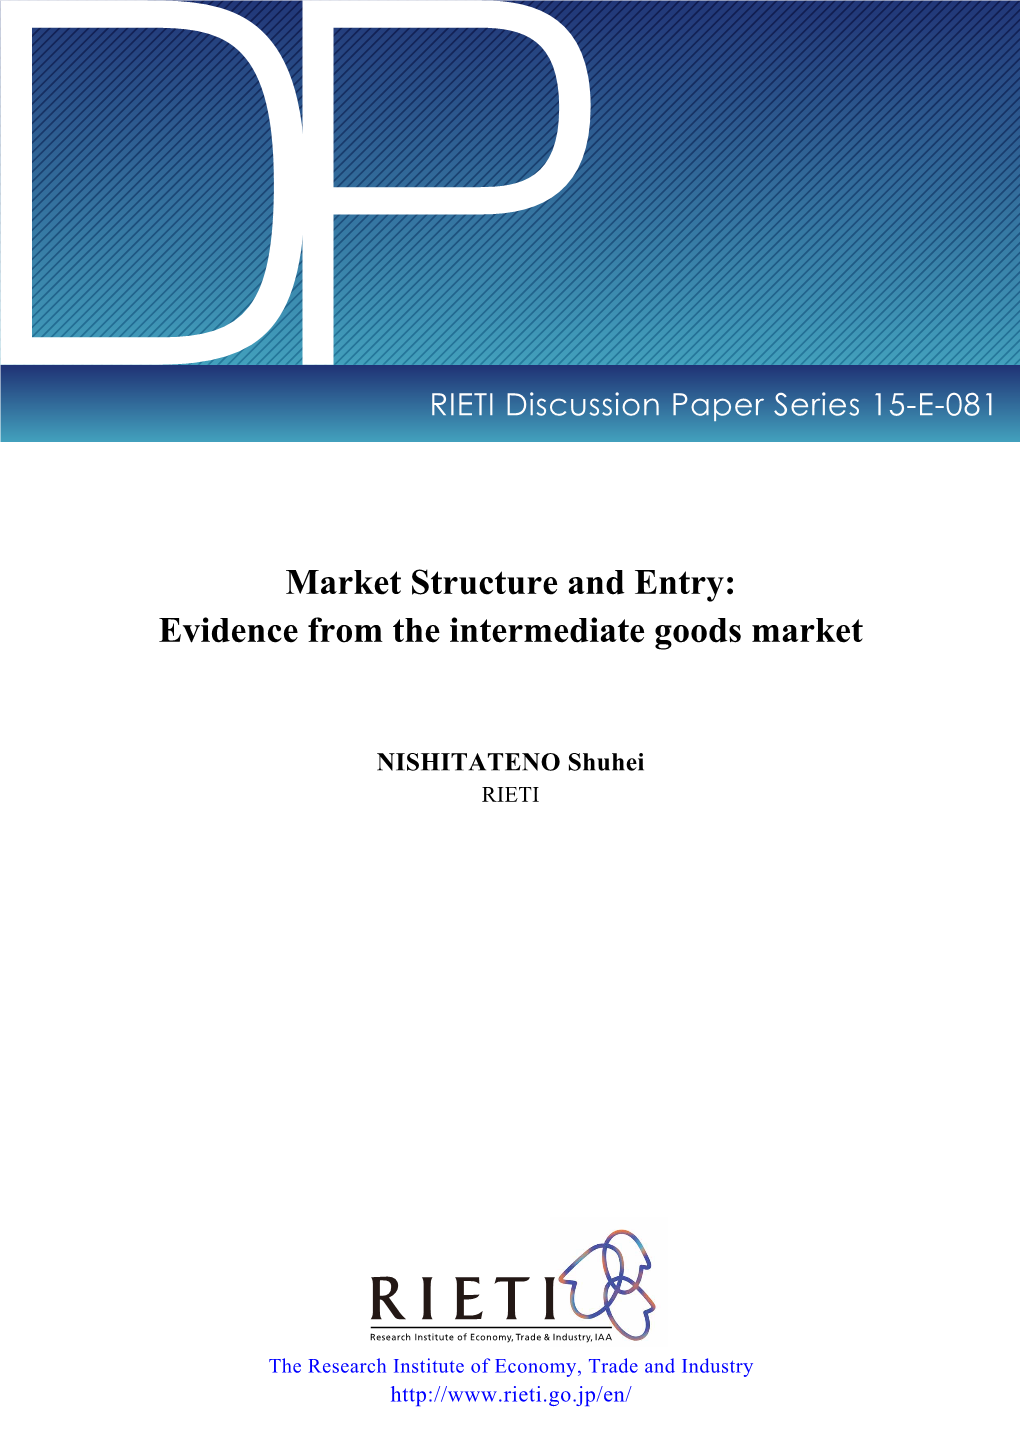 Market Structure and Entry: Evidence from the Intermediate Goods Market